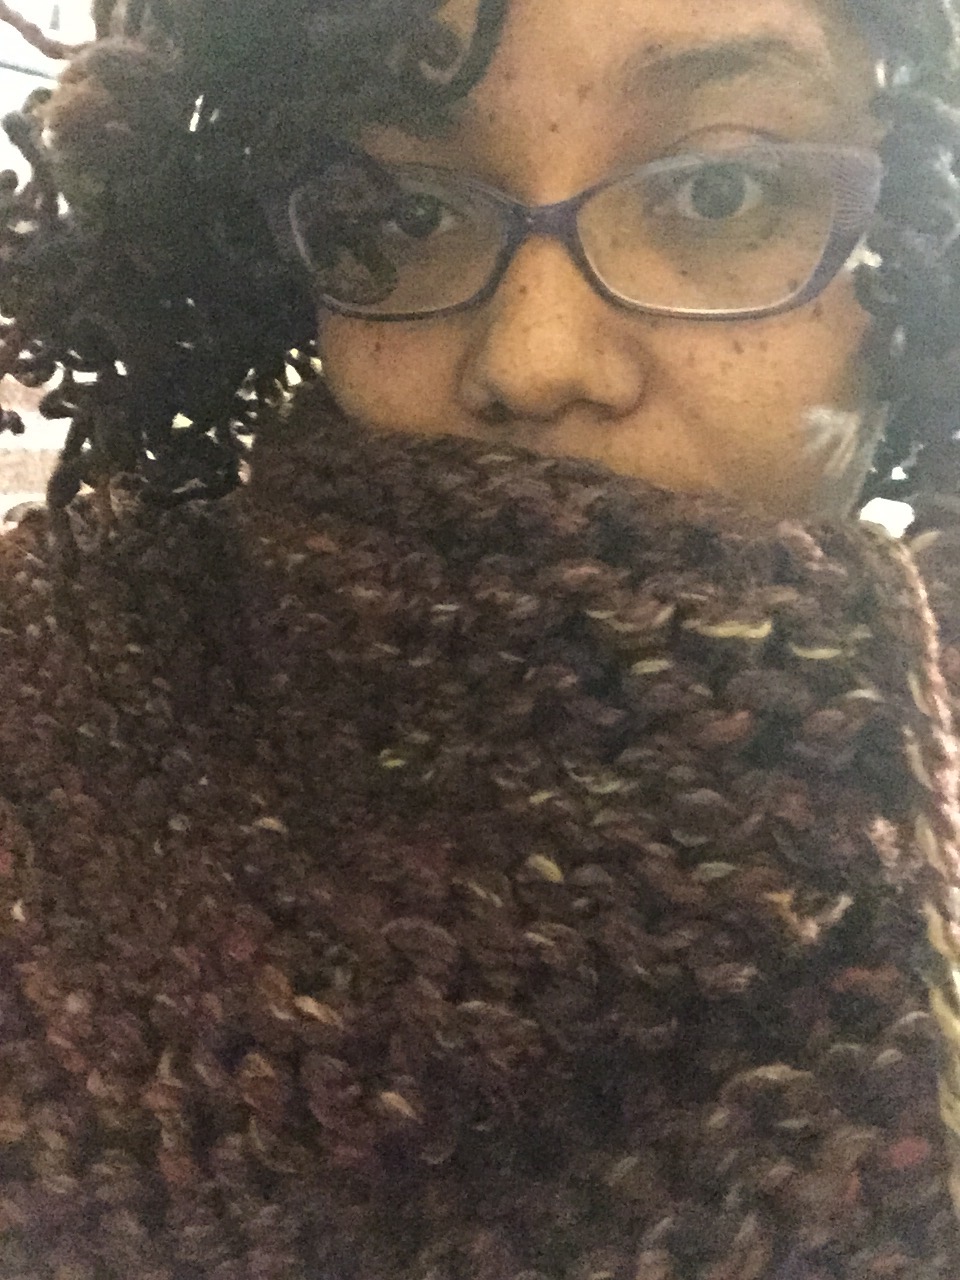 Attempt at the "Claire Cowl"